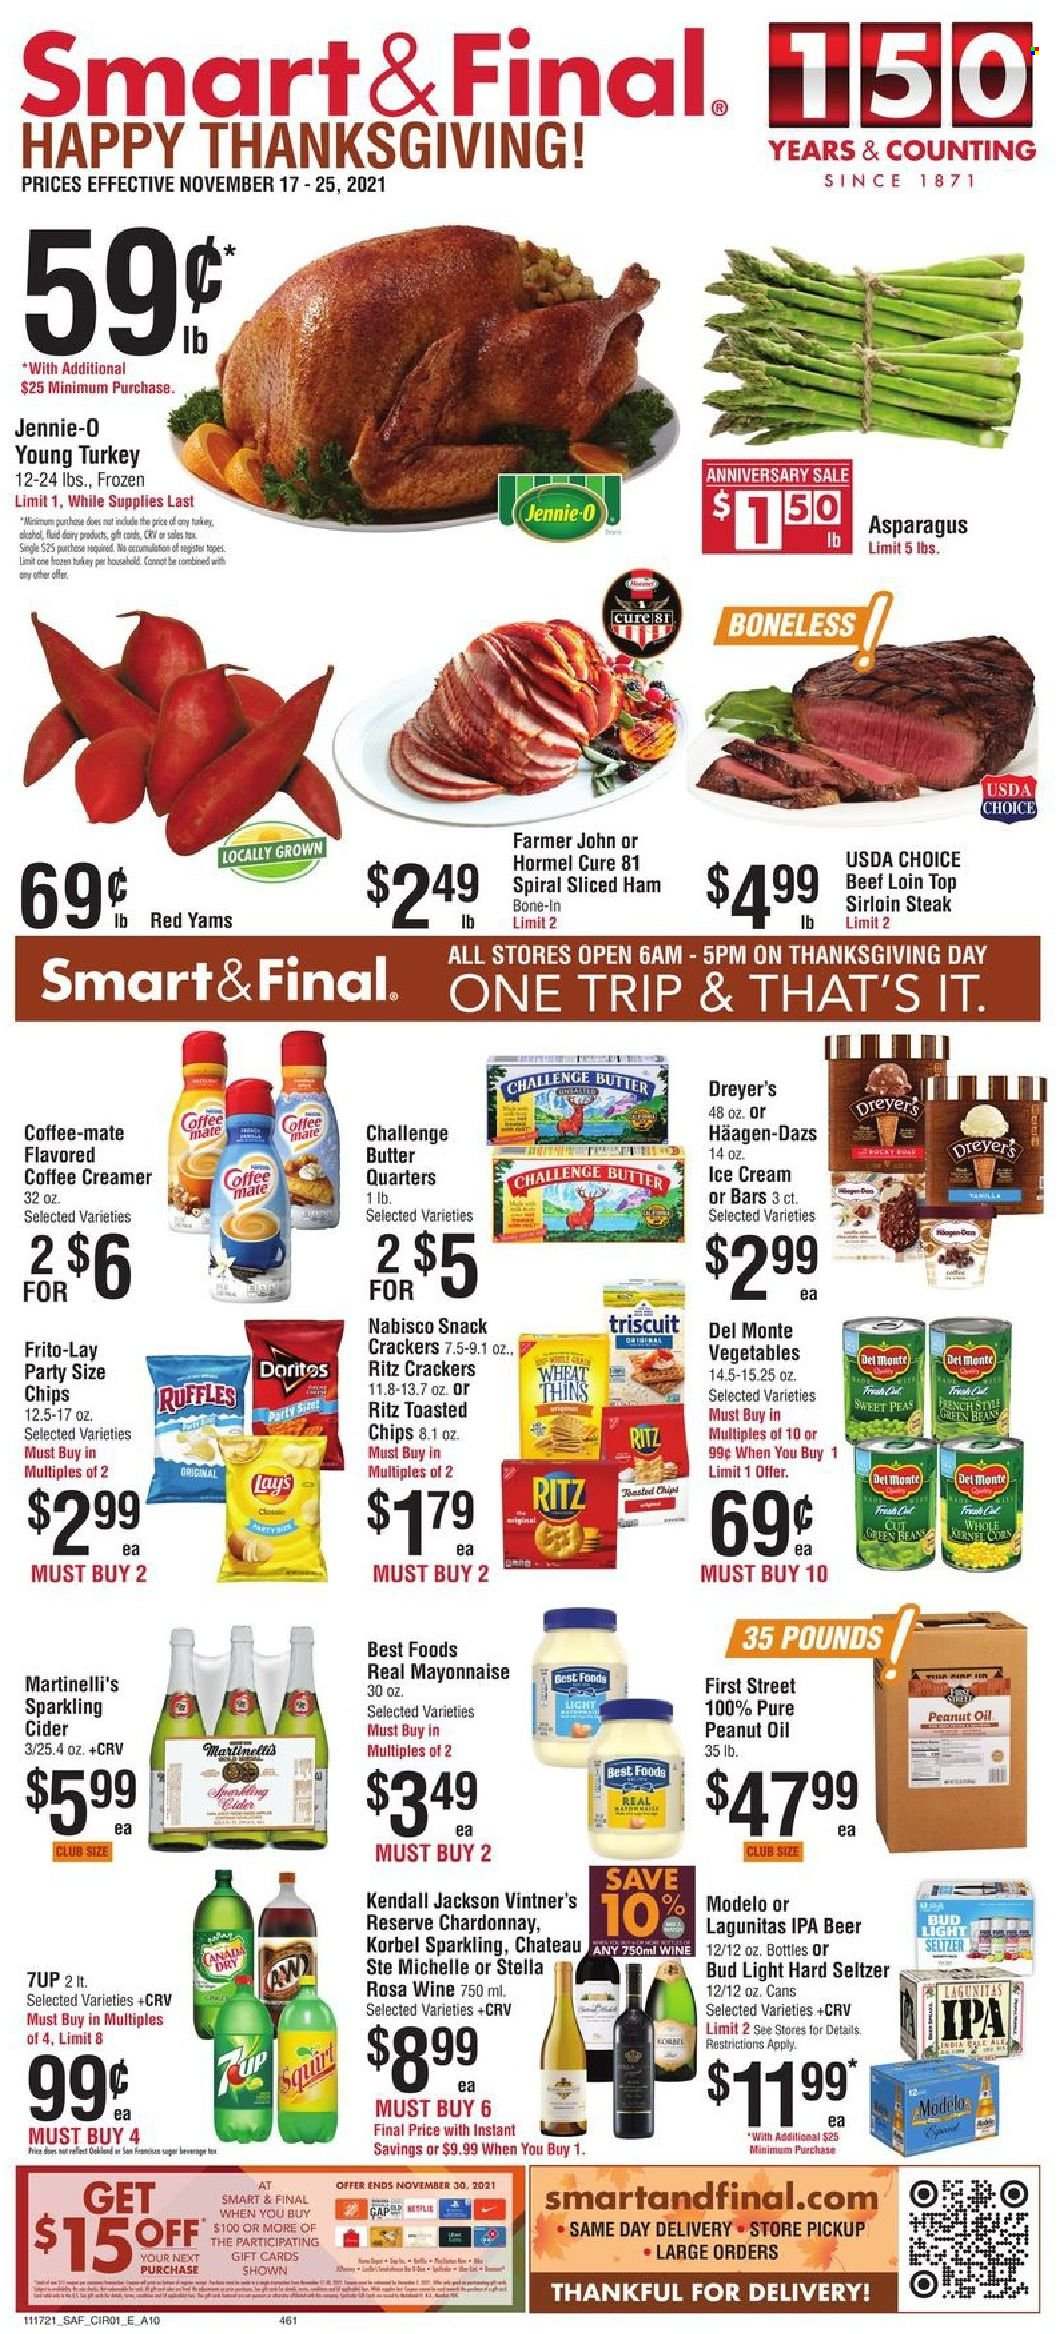 thumbnail - Smart & Final Flyer - 11/17/2021 - 11/25/2021 - Sales products - asparagus, corn, peas, Hormel, ham, Coffee-Mate, butter, creamer, mayonnaise, ice cream, Häagen-Dazs, snack, crackers, RITZ, Lay’s, Thins, Frito-Lay, Ruffles, peanut oil, oil, Canada Dry, 7UP, sparkling cider, sparkling wine, white wine, Chardonnay, wine, Hard Seltzer, cider, beer, Bud Light, IPA, Modelo, beef sirloin, steak, sirloin steak. Page 1.